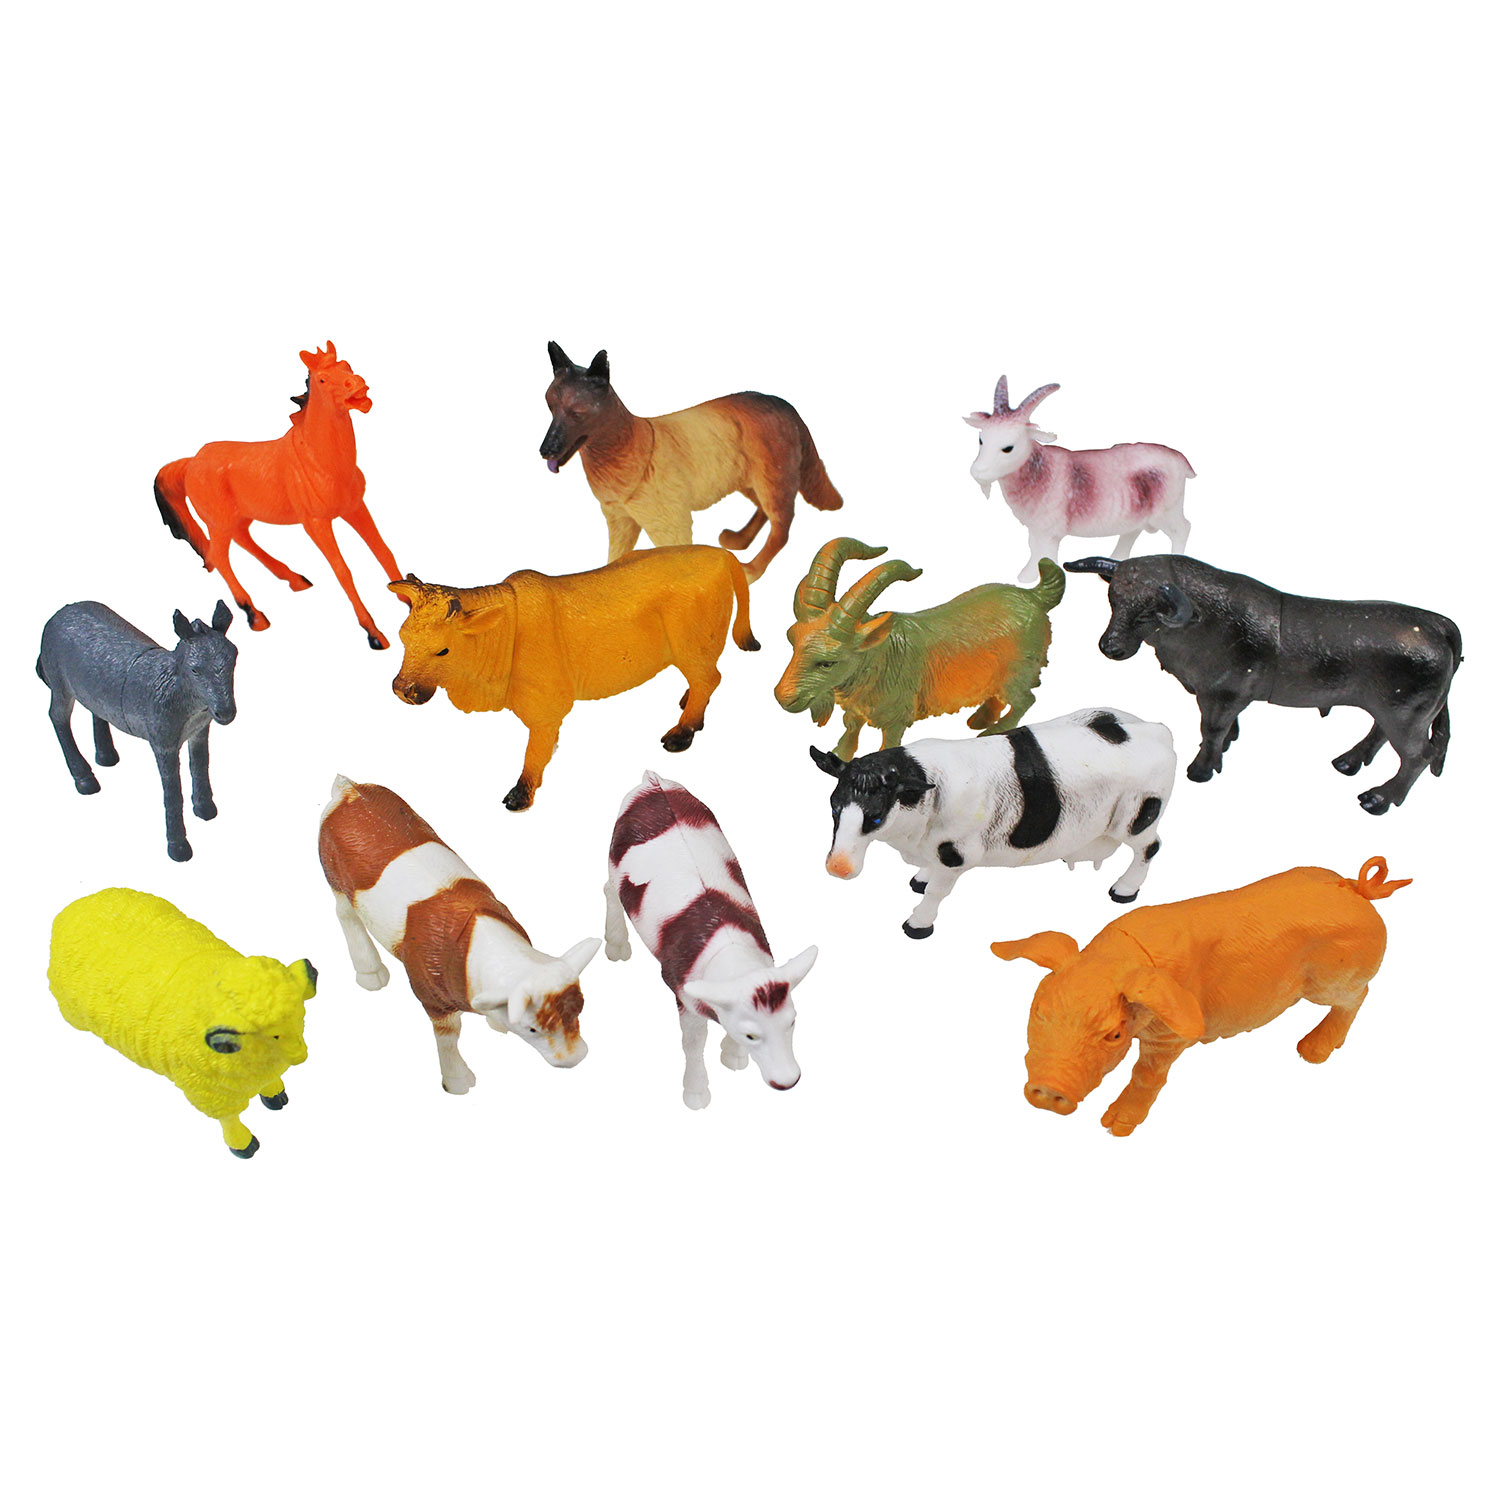 Assorted Farm Animals - 5-7 Inch - 12 Count: Rebecca's Toys & Prizes